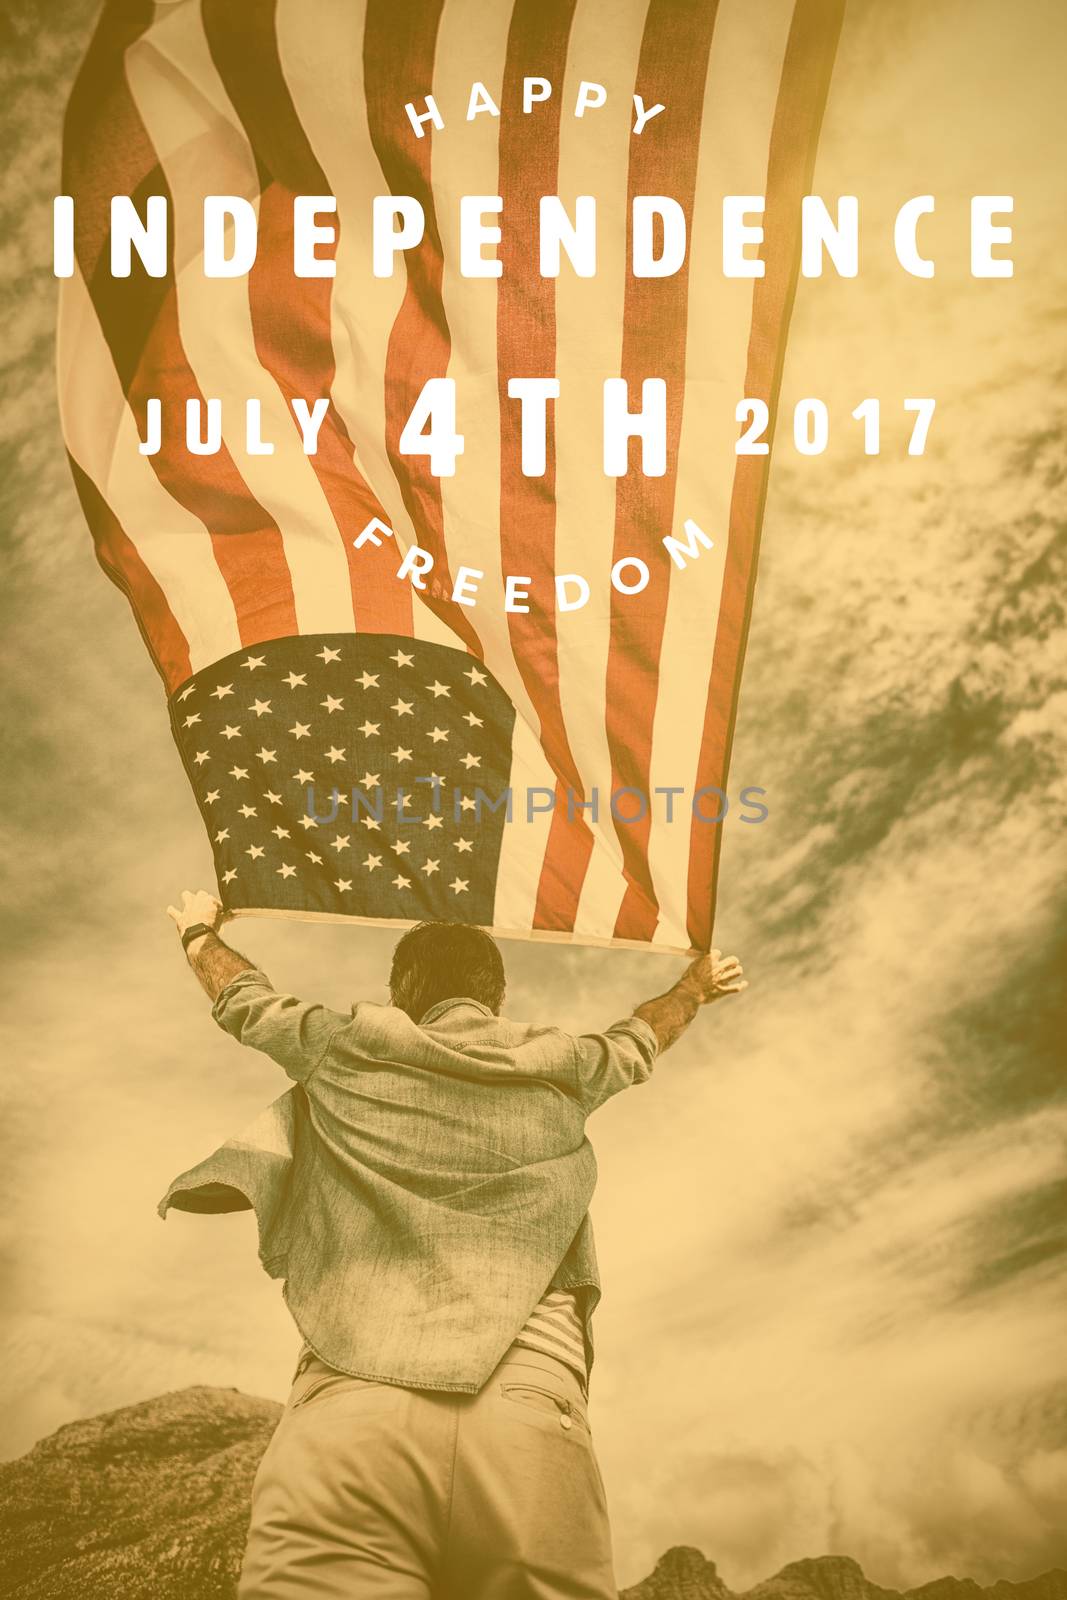 Computer graphic image of happy 4th of july text against rear view of man holding american flag against sky